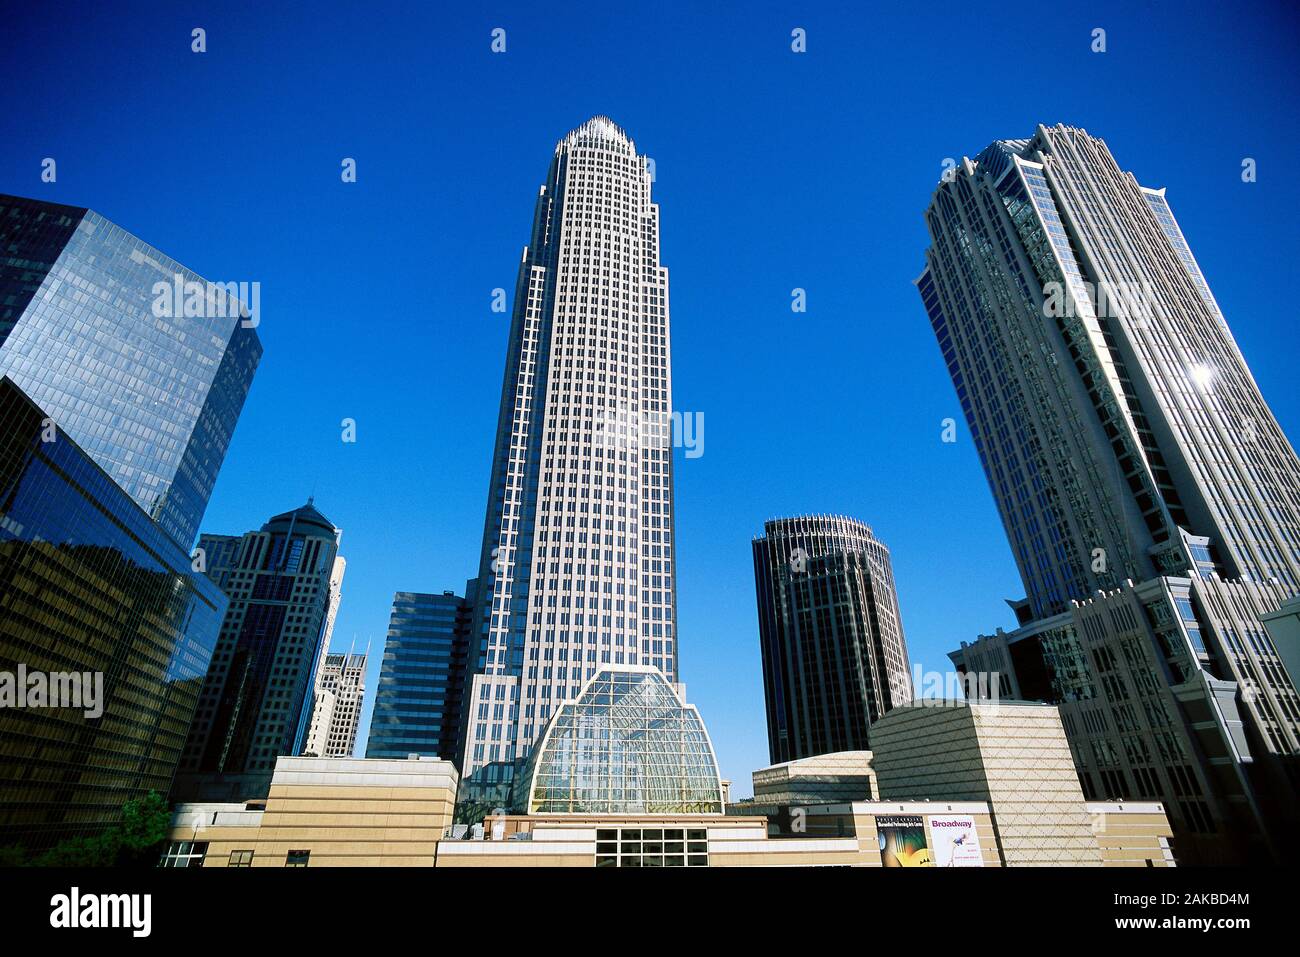 Low angle view of skyscrapers, Charlotte, North Carolina, USA Banque D'Images